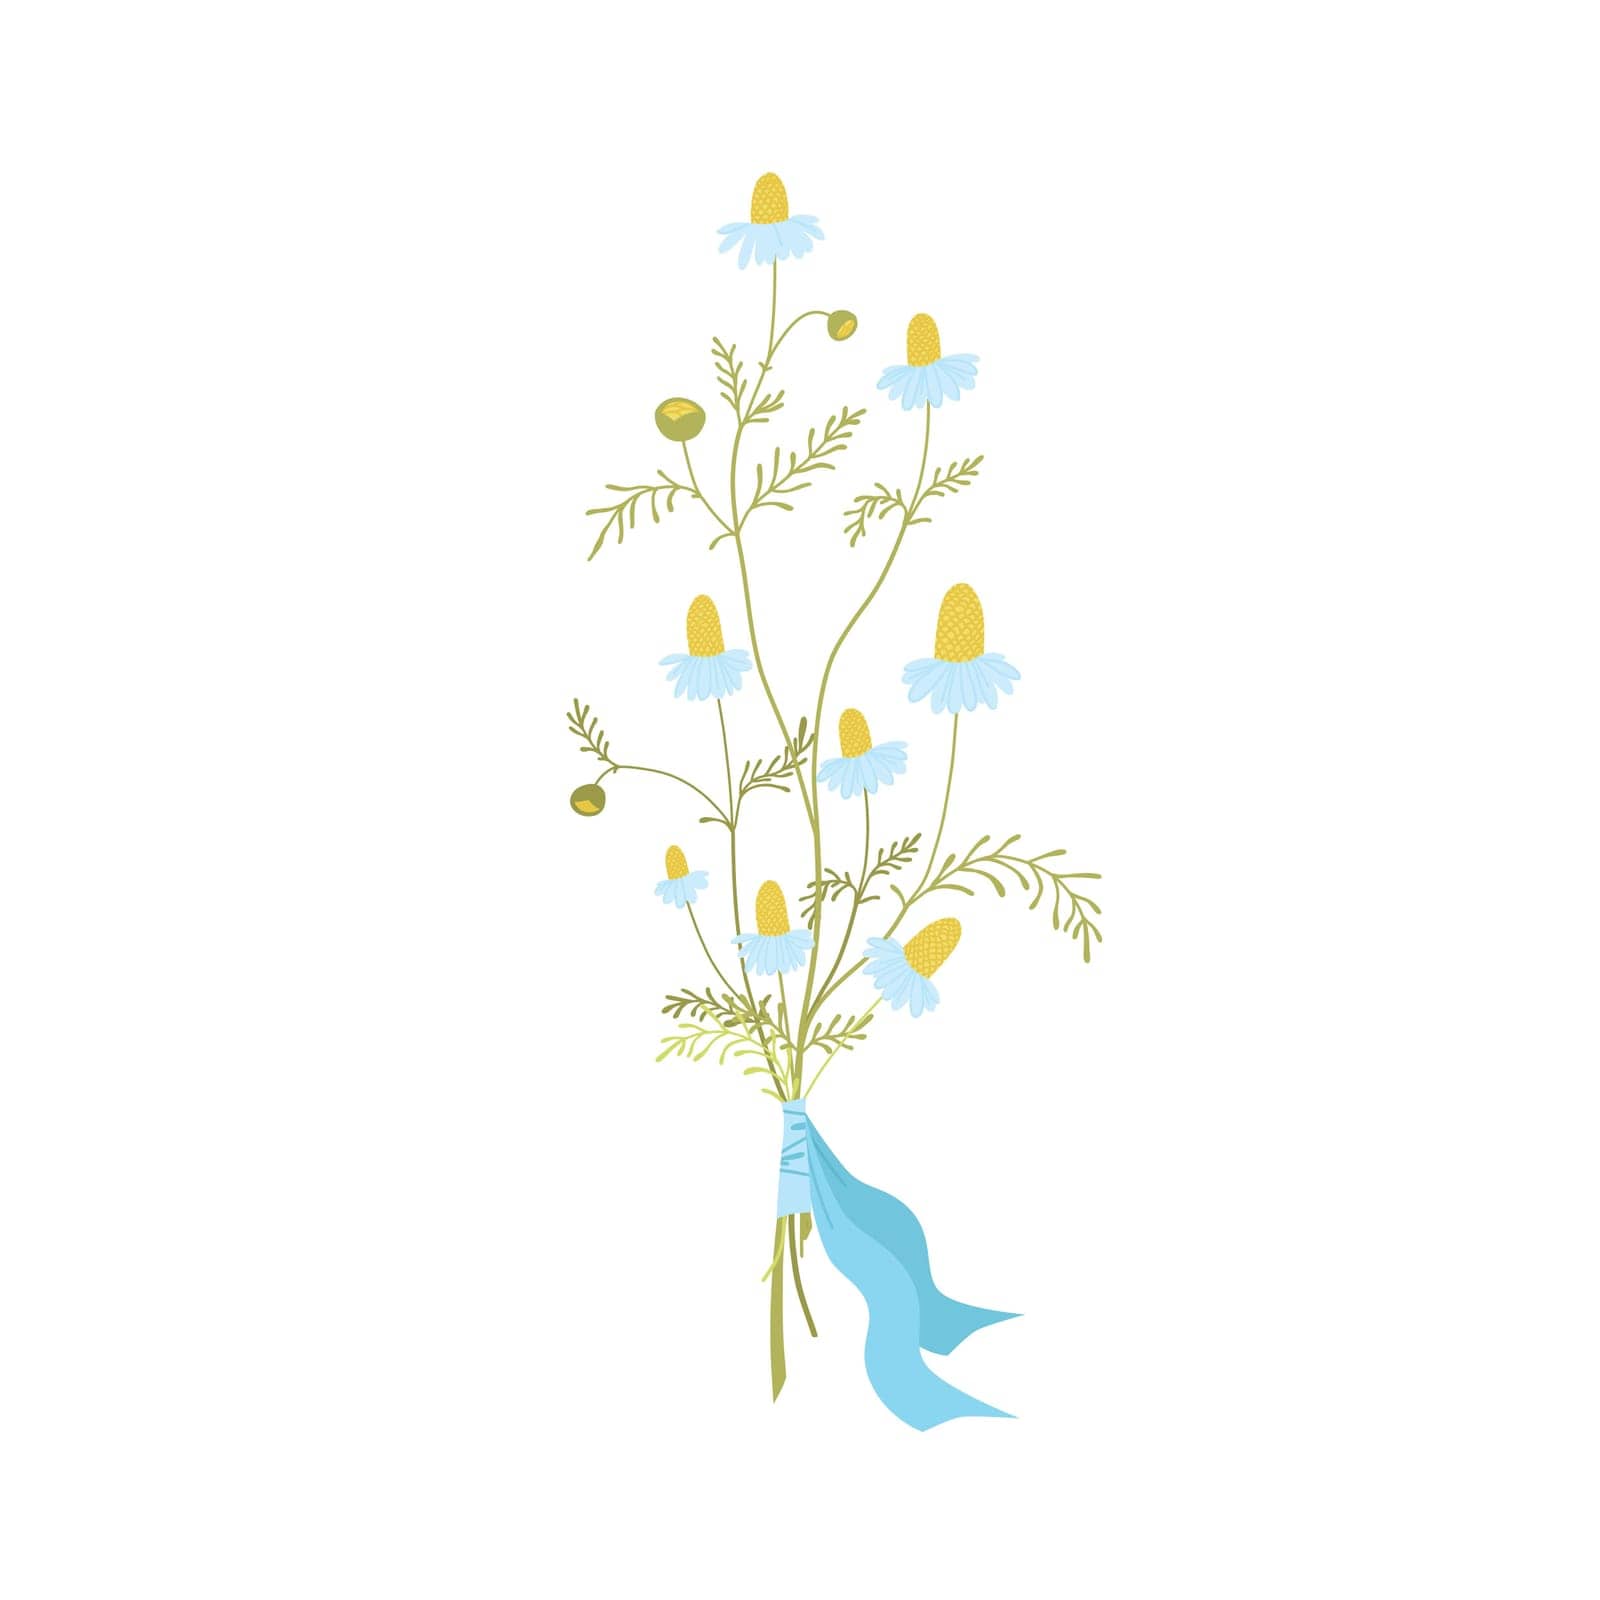 Neat bouquet of small chamomile flowers tied with a blue ribbon. Field herbs and medical plants by Senaysky